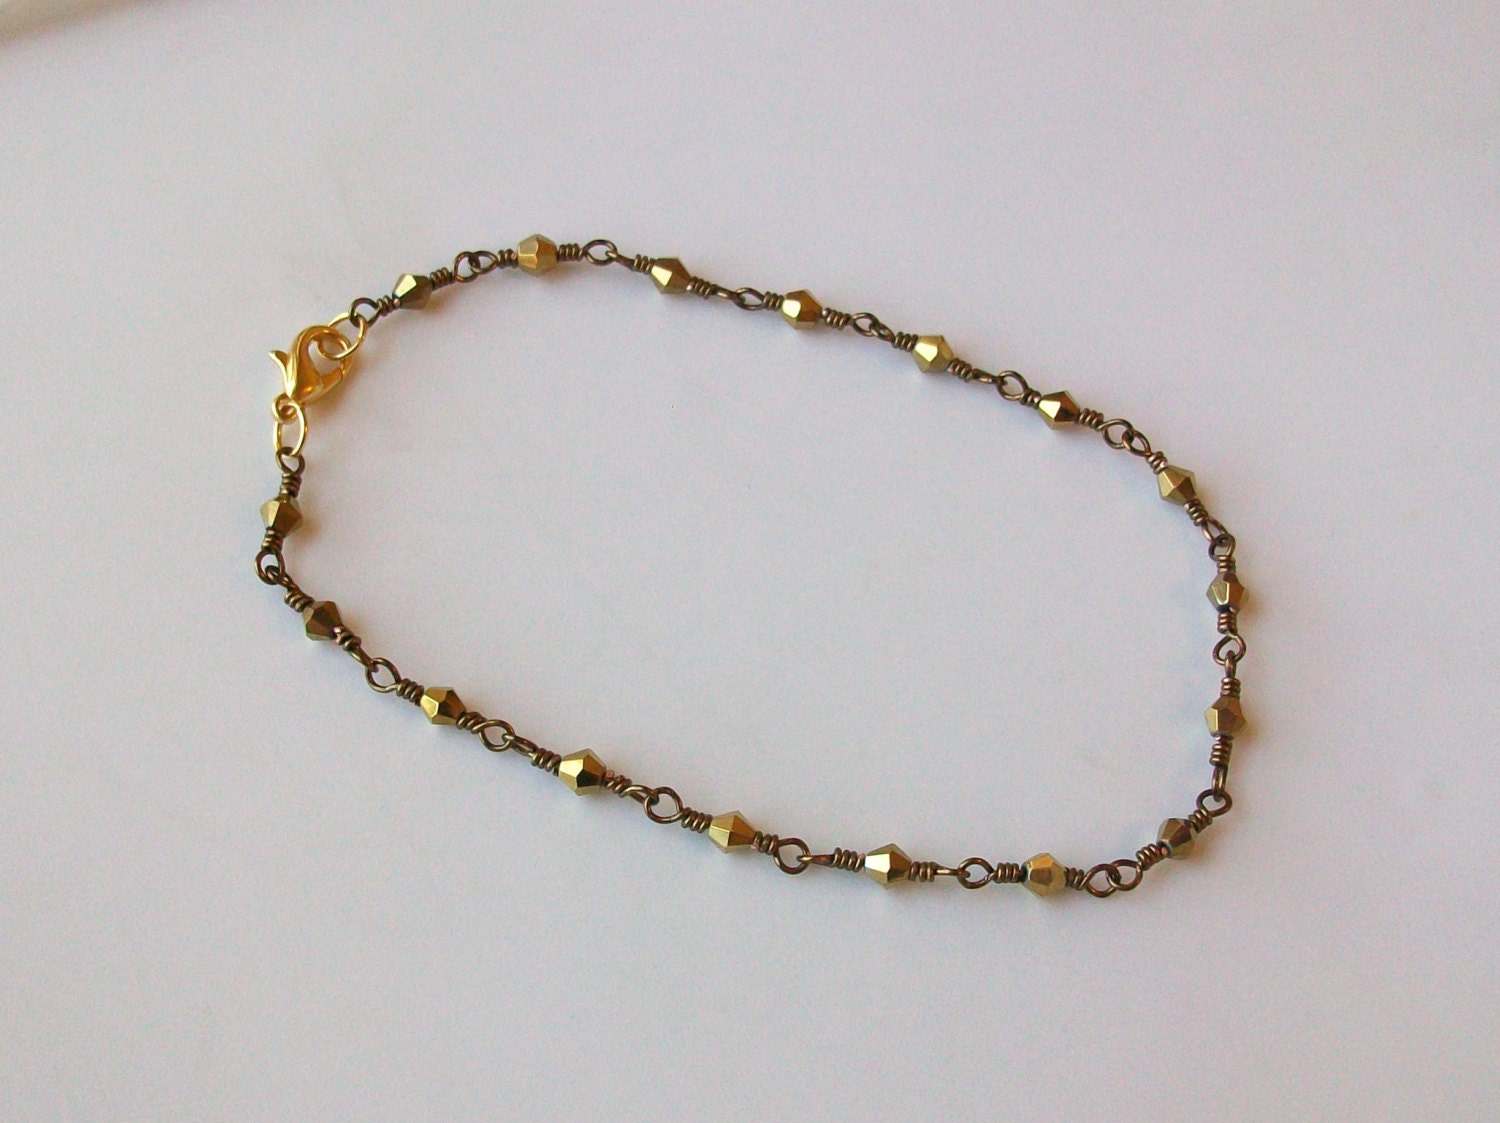 Metallic Gold Czech Crystal Wire Wrapped Chain Link Anklet - Ankle Bracelet